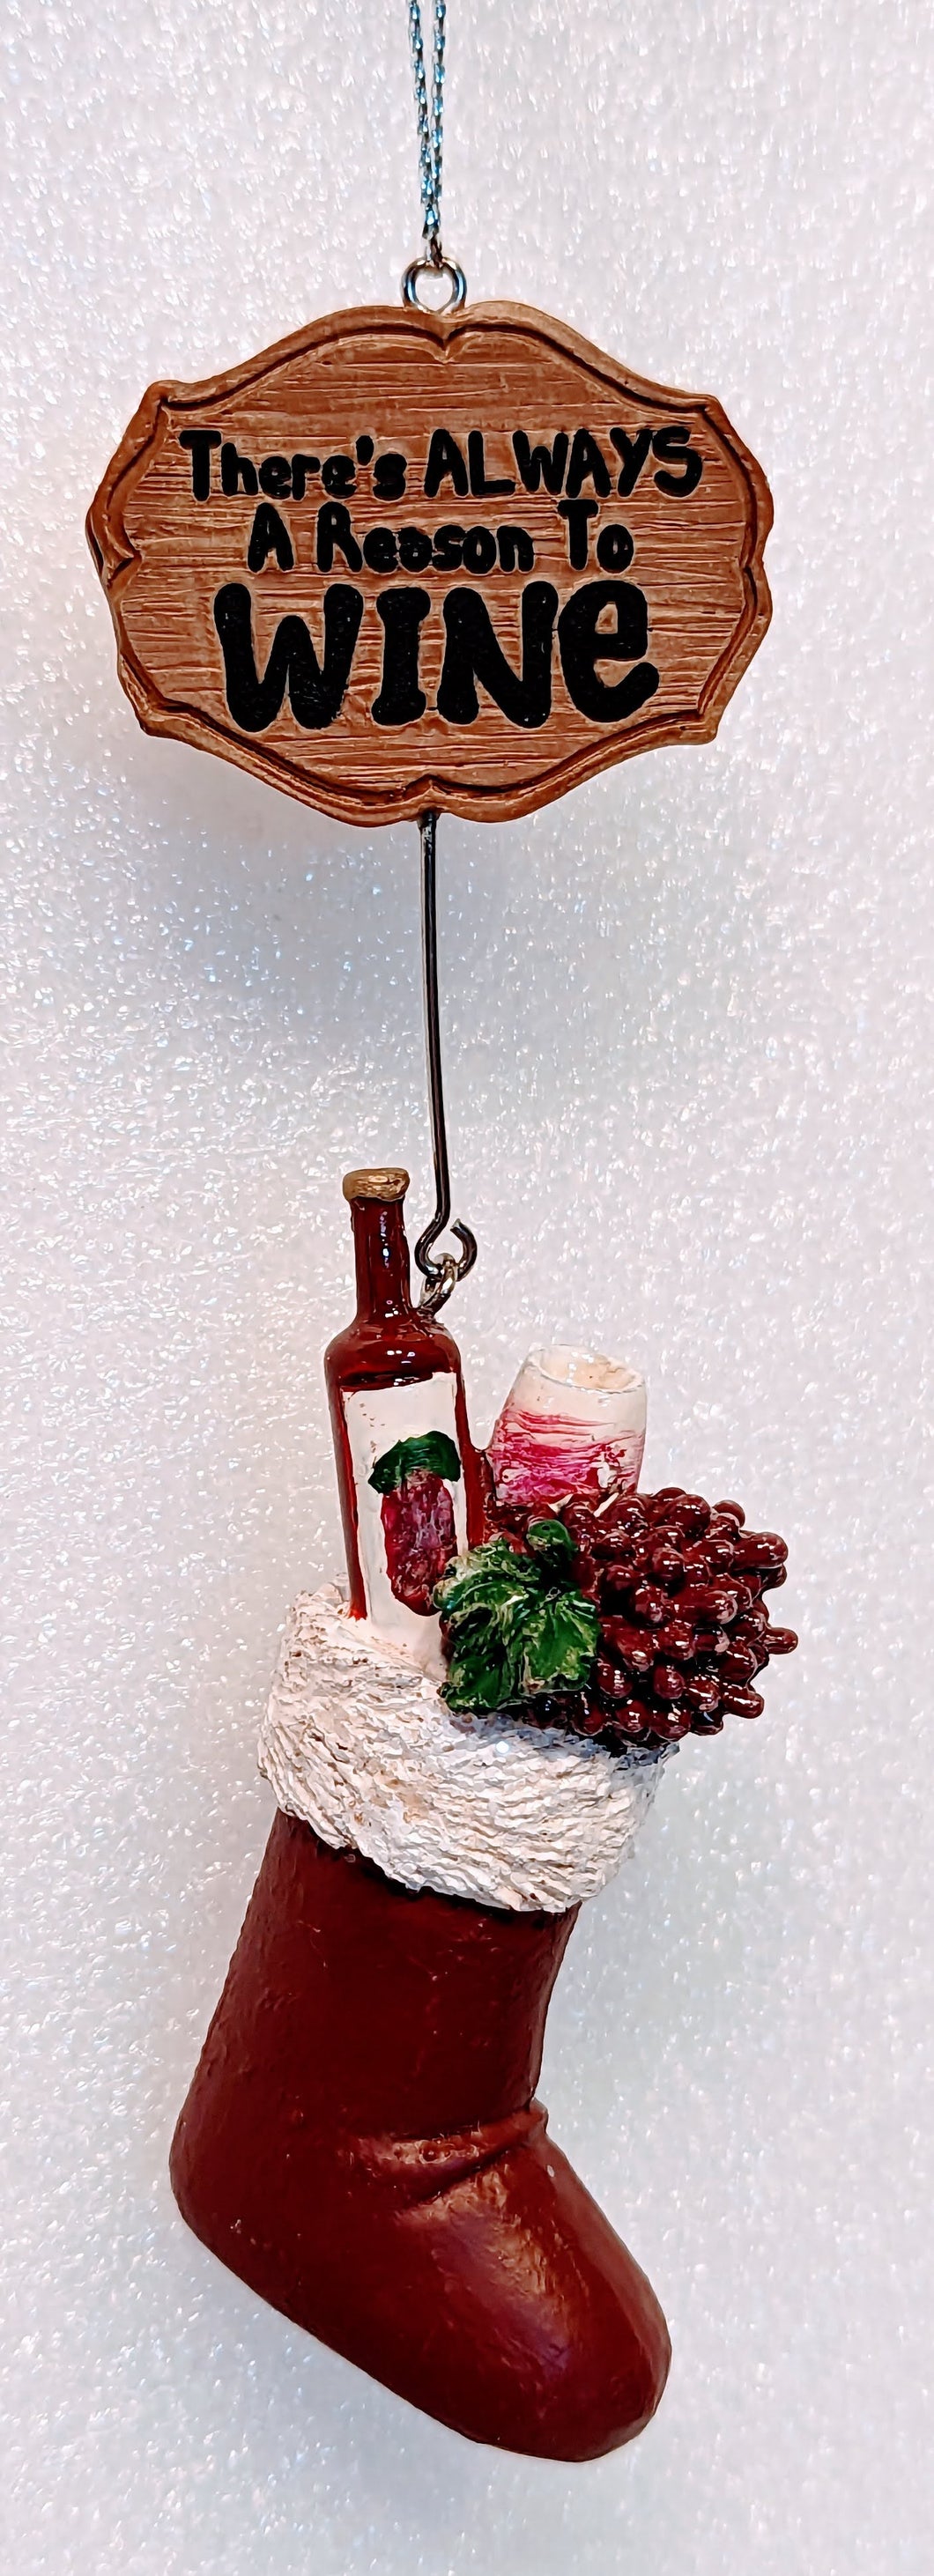 Burgundy Wine Stocking Ornament with Bottle of Wine-There's Always A Reason To WINE